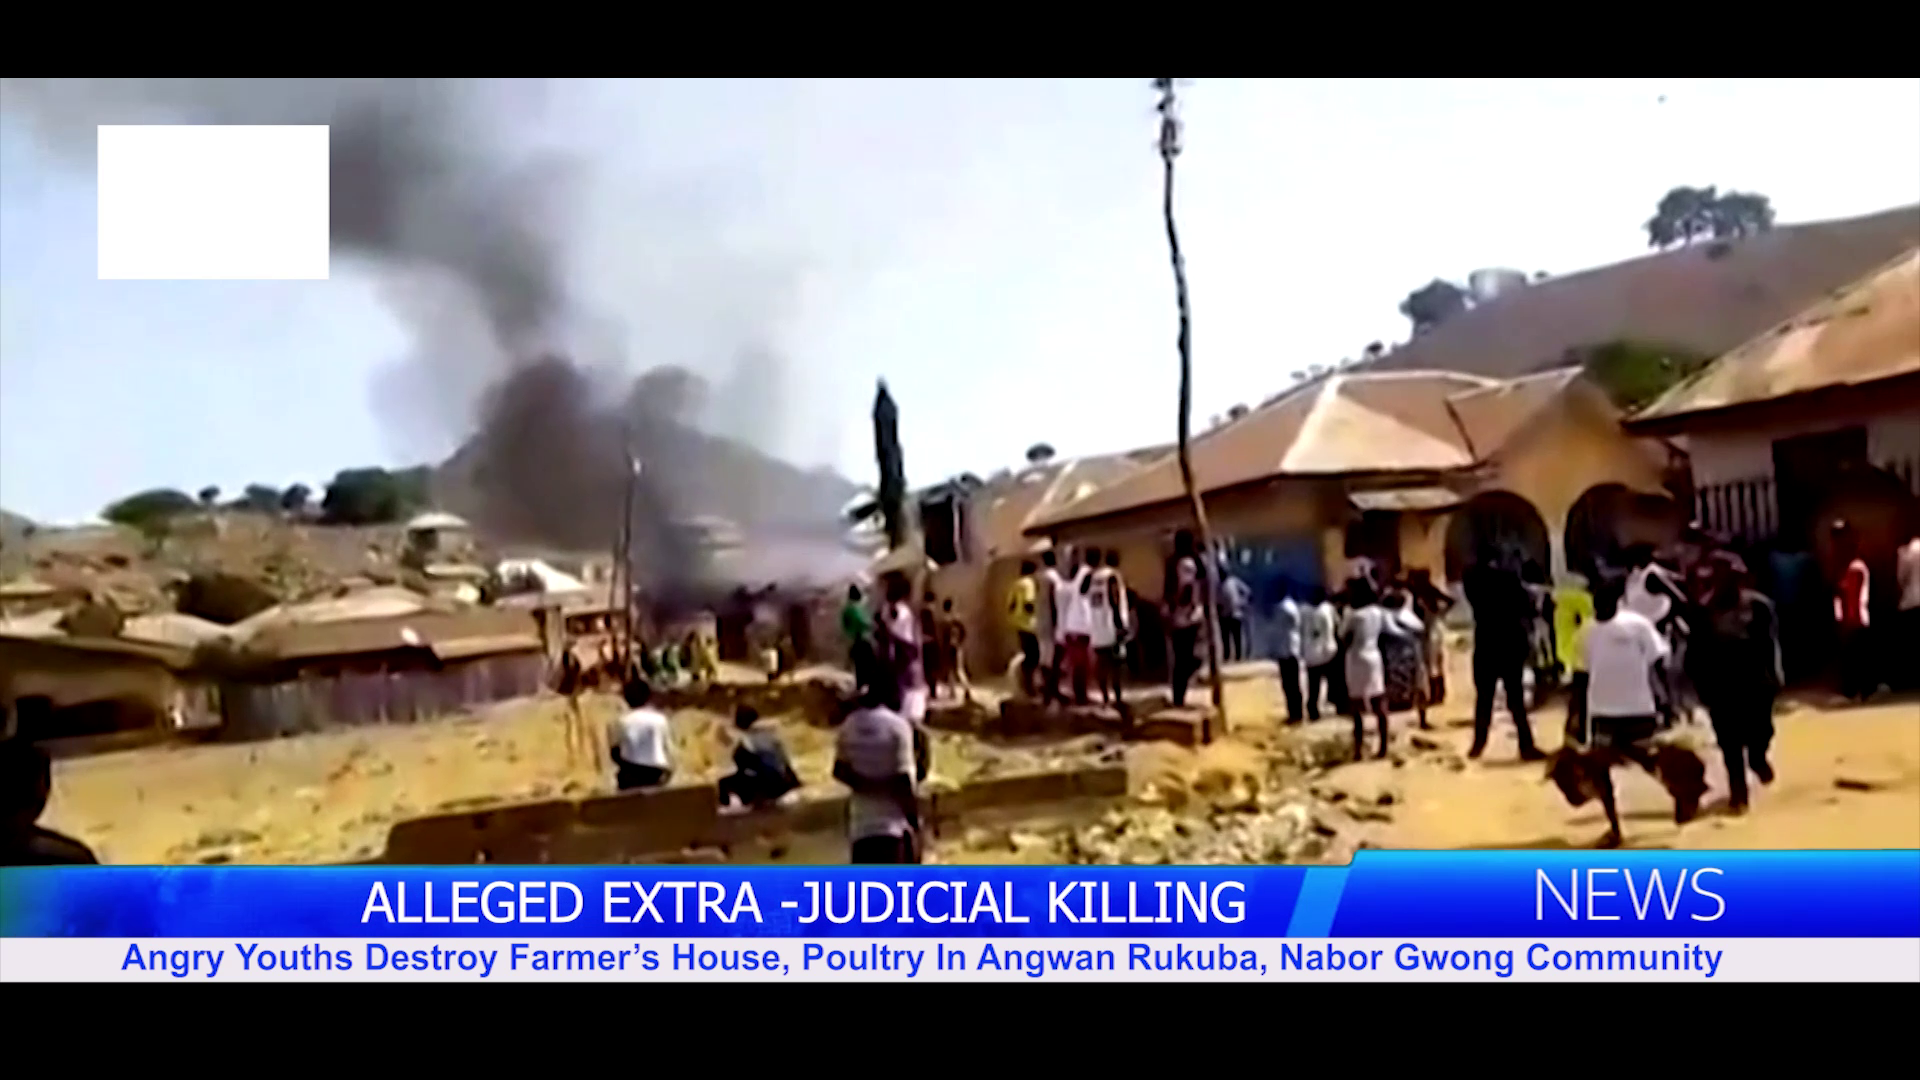 Angry Youths Destroy Farmer’s House, Poultry In Angwan Rukuba, Nabor Gwong community